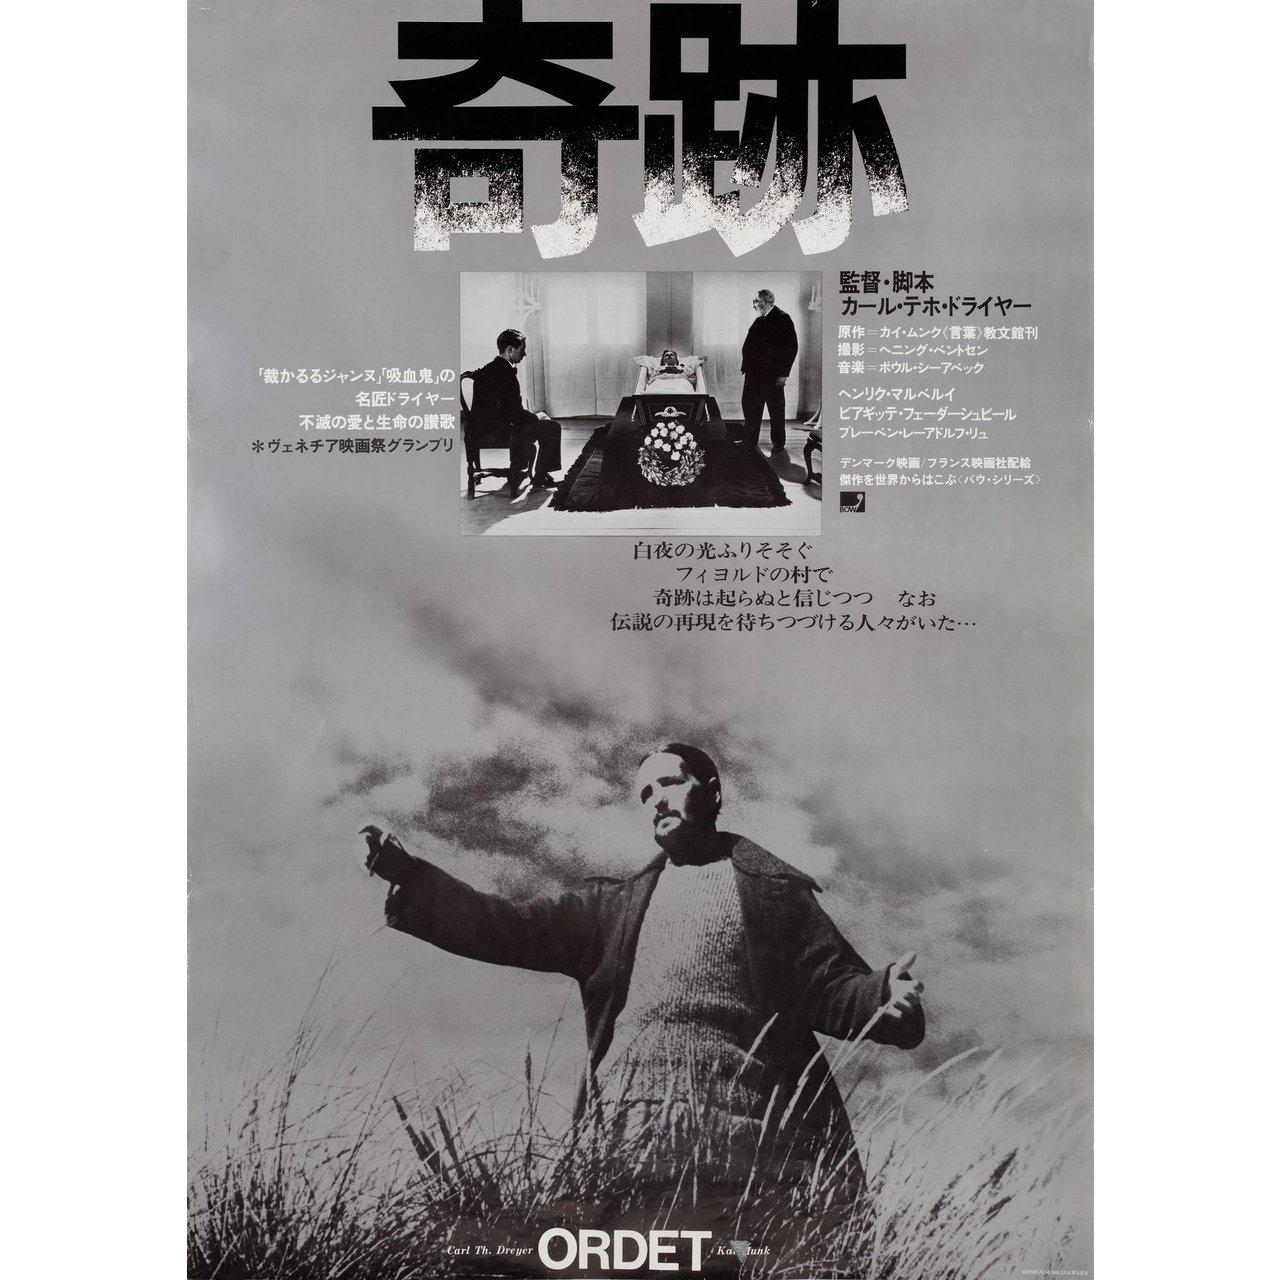 Original 1980 Japanese B2 poster by Masakatsu Ogasawara for the first Japanese theatrical release of the 1955 film Ordet directed by Carl Theodor Dreyer with Hanne Agesen / Kirsten Andreasen / Sylvia Eckhausen / Birgitte Federspiel. Very Good